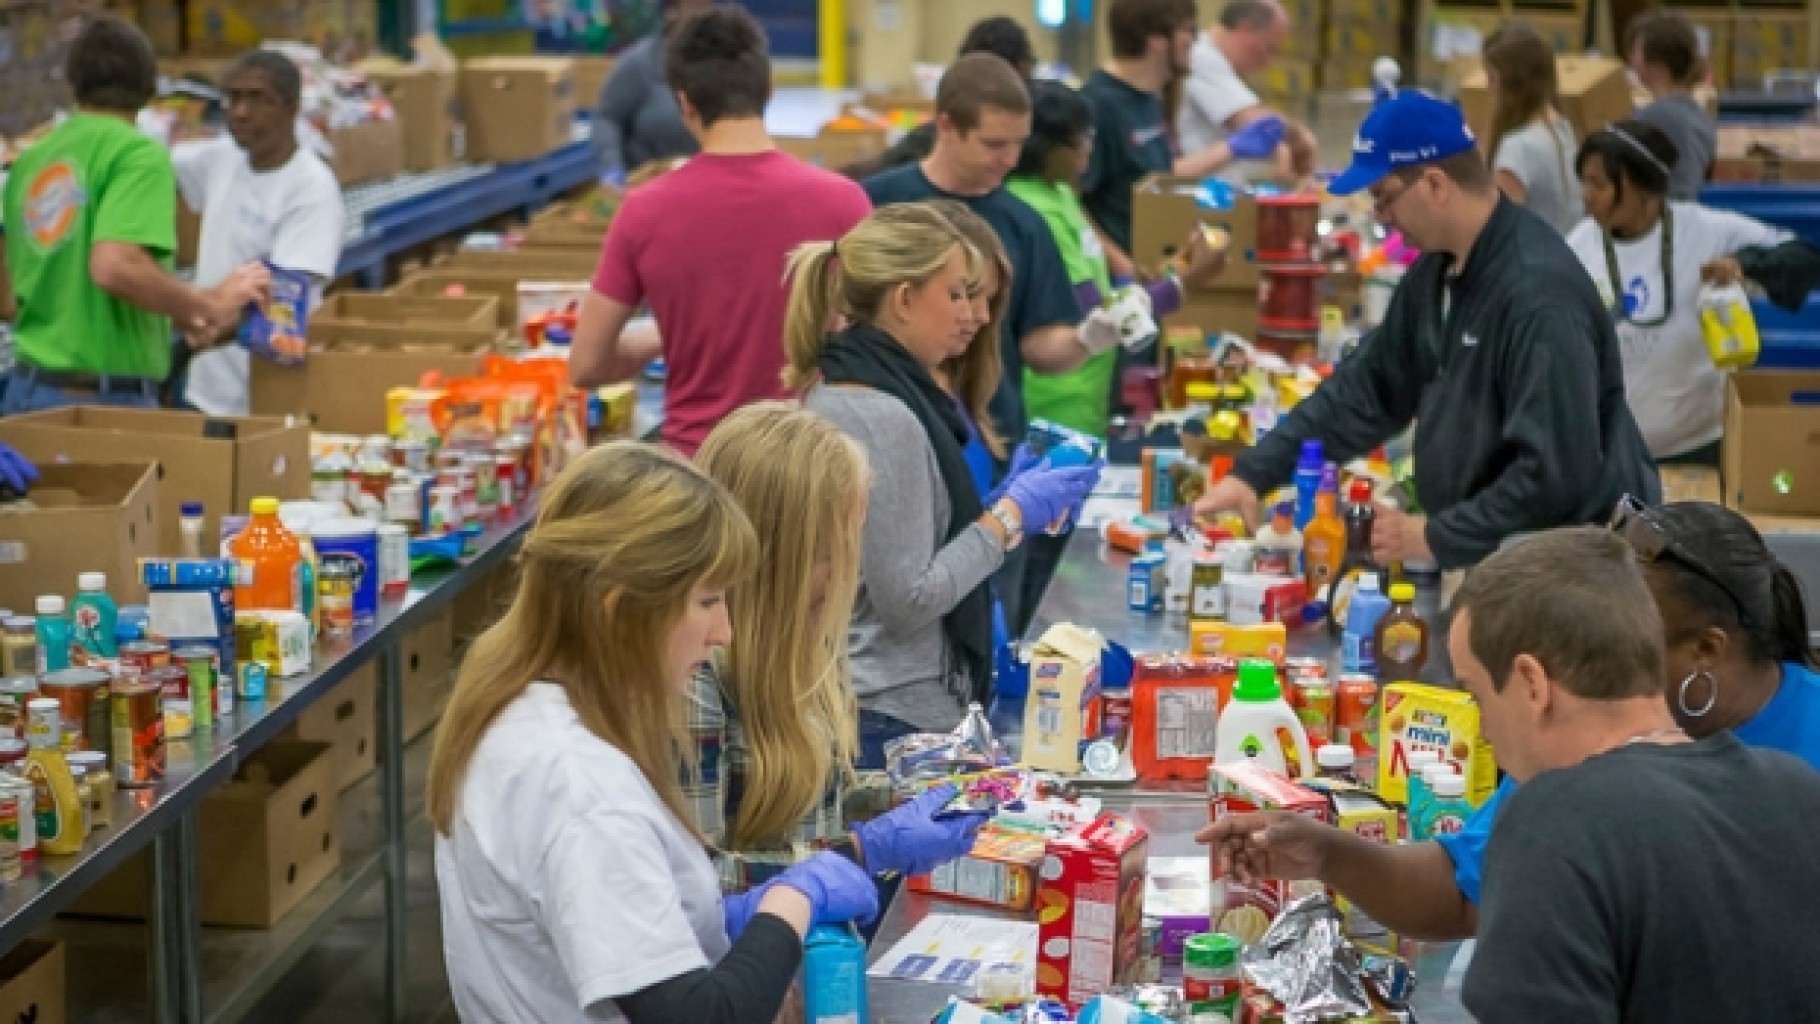 Regional Food Bank Needs 1,400 Volunteers  in April to Prepare, Pack and Sort Food for the Teacher Walkout and Beyond